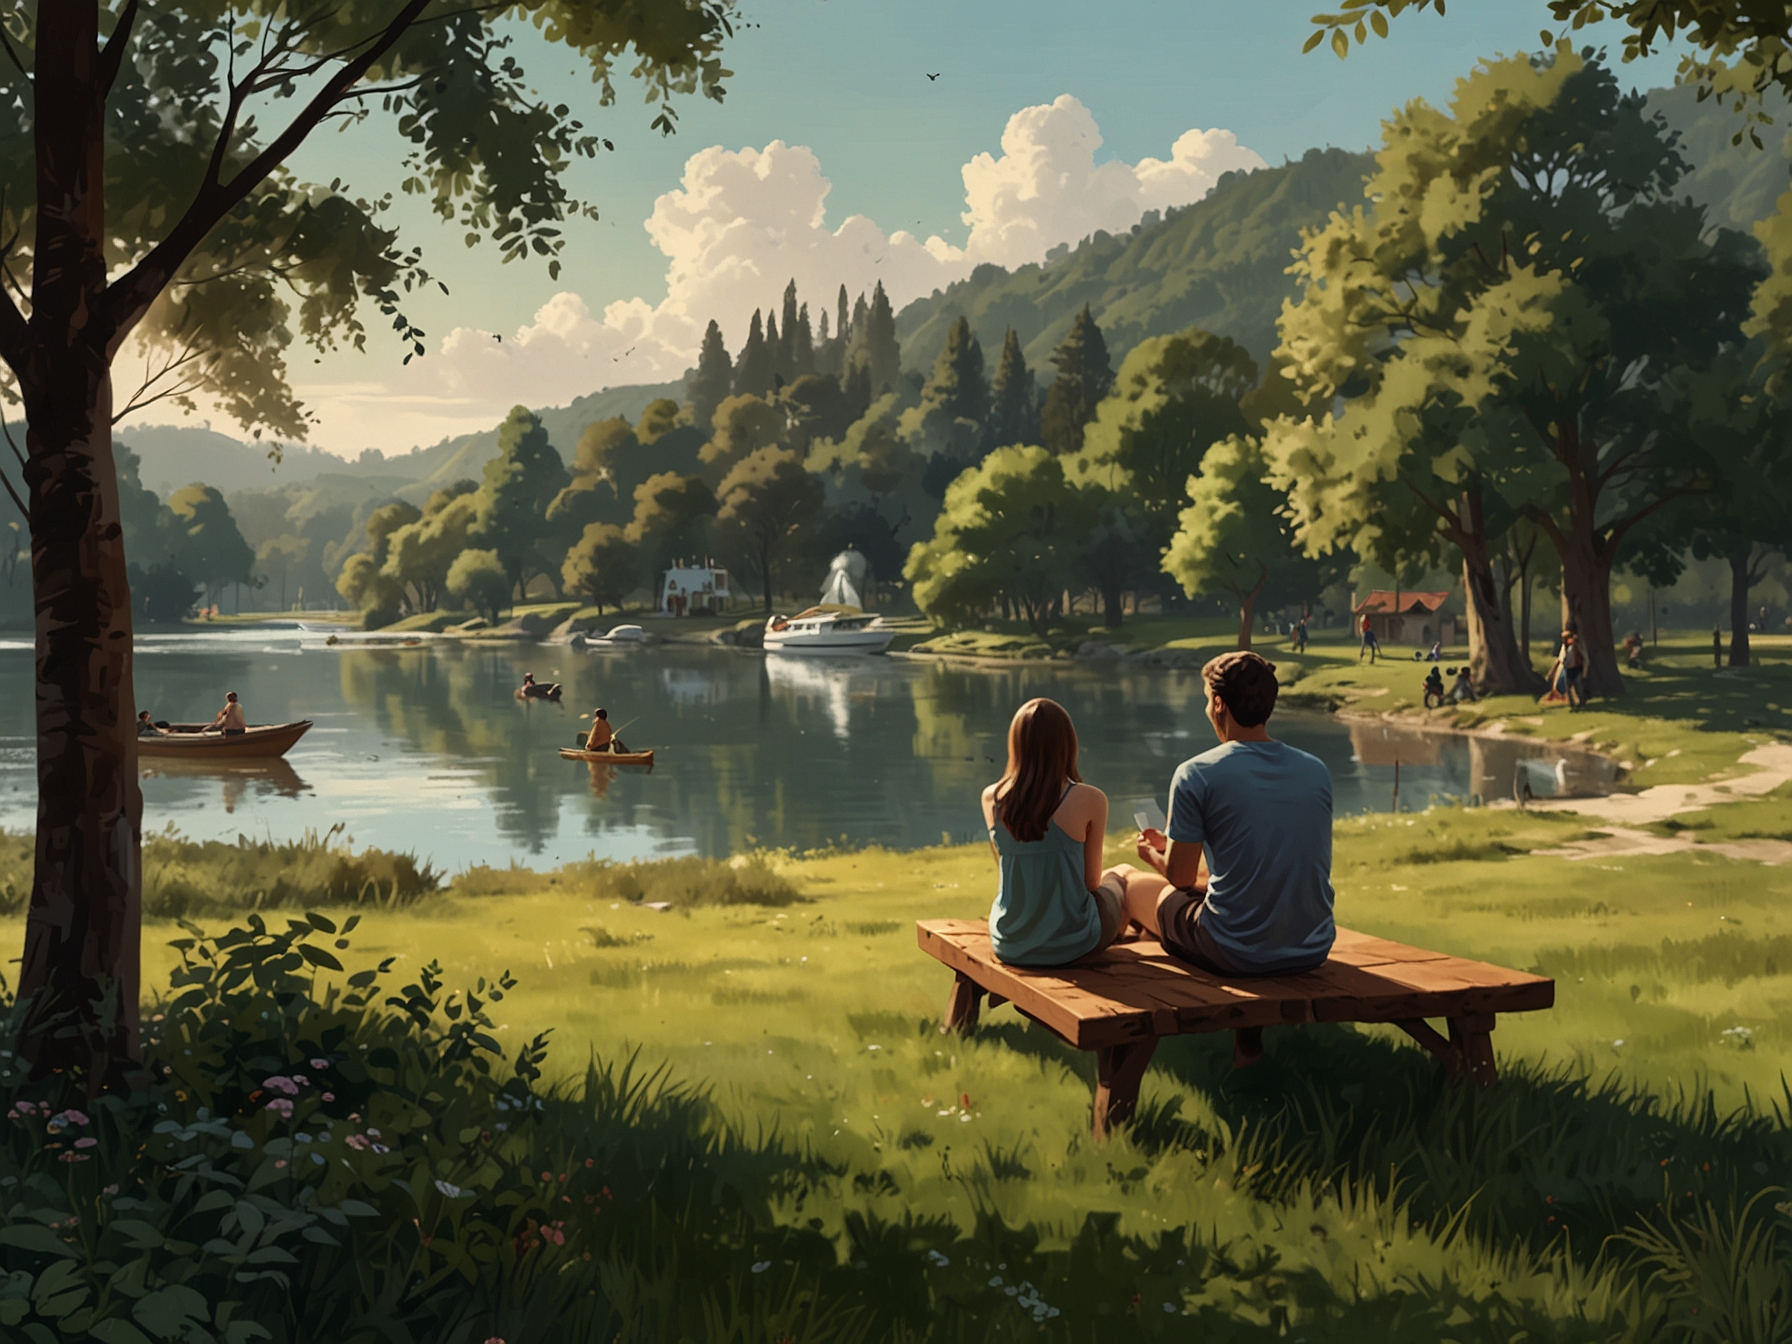 A tranquil scene with individuals enjoying outdoor activities, emphasizing the benefits of reduced screen time and increased presence in daily life due to using a dumbphone.